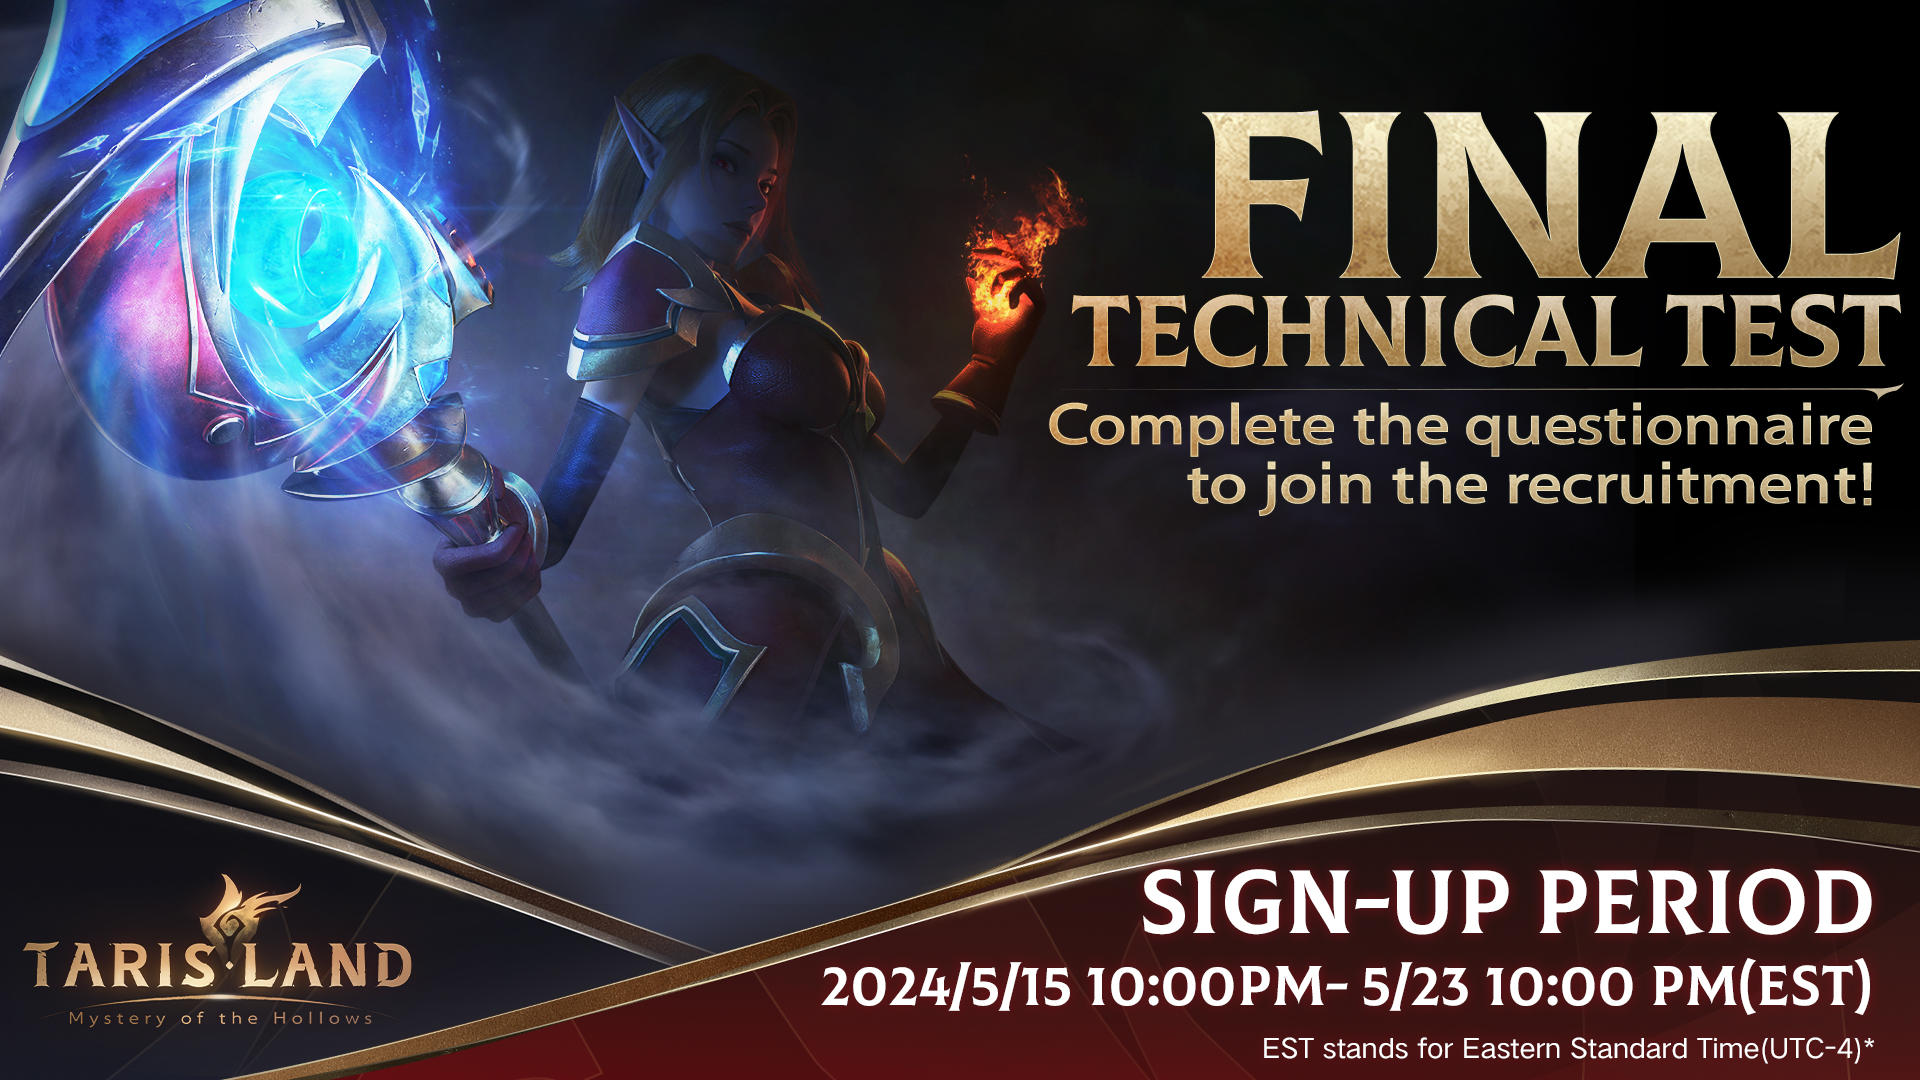 Final round Technical Test Recruitment! Sign-up now to join test during May 27-30 on all platforms!